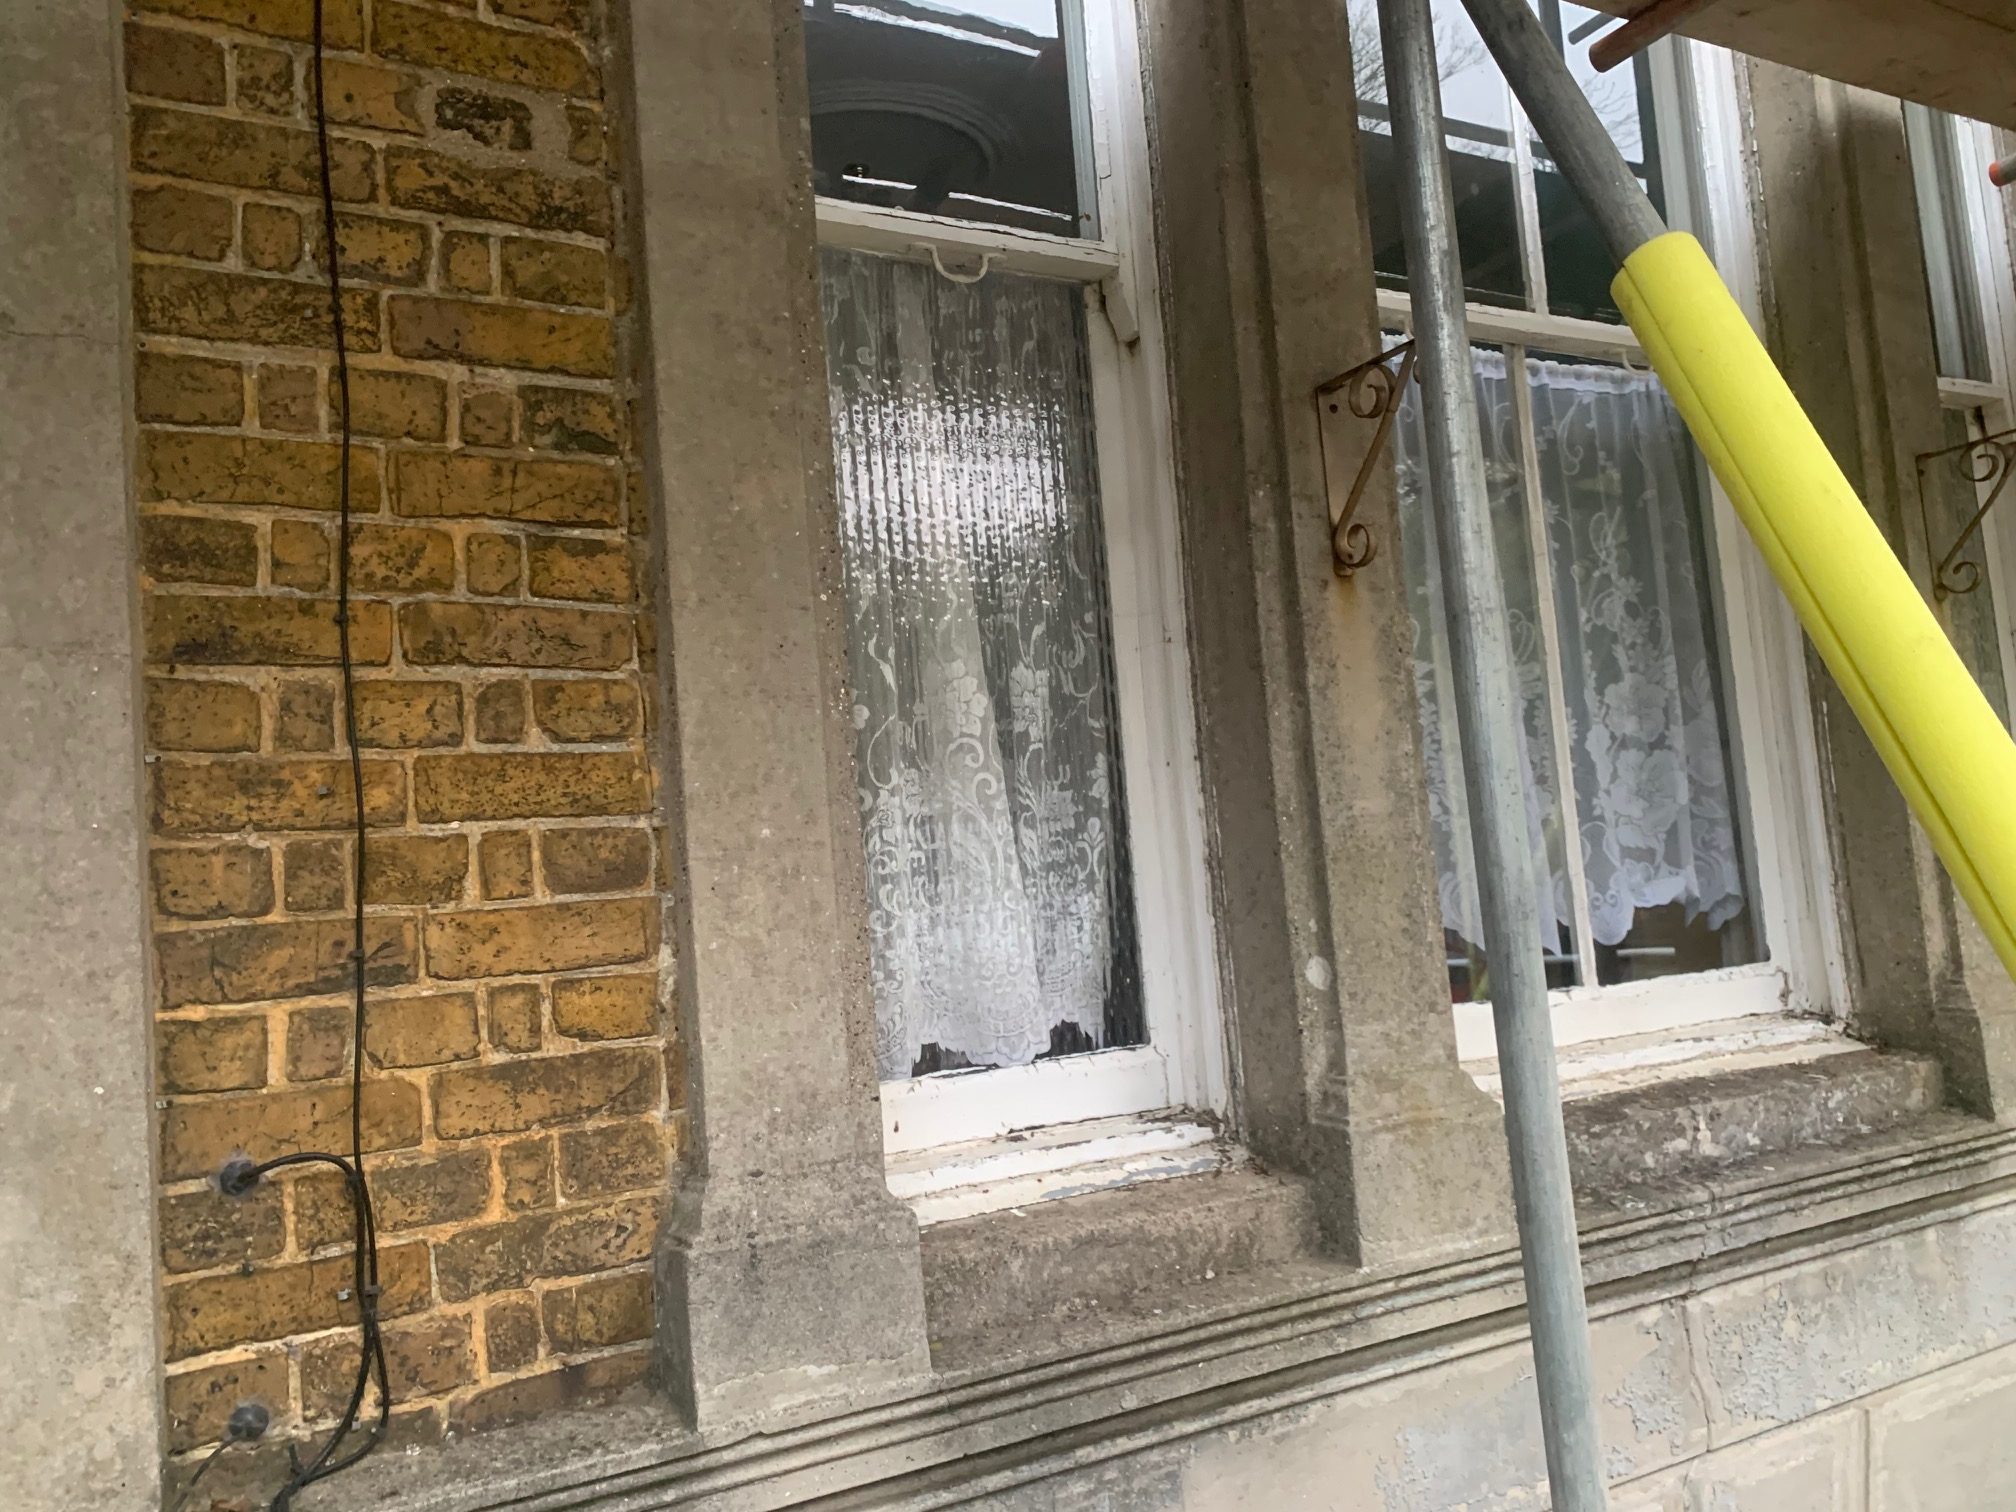 Malling Masonry Doff Cleaning service to restore Stonework to all elevations for this Kent residential property